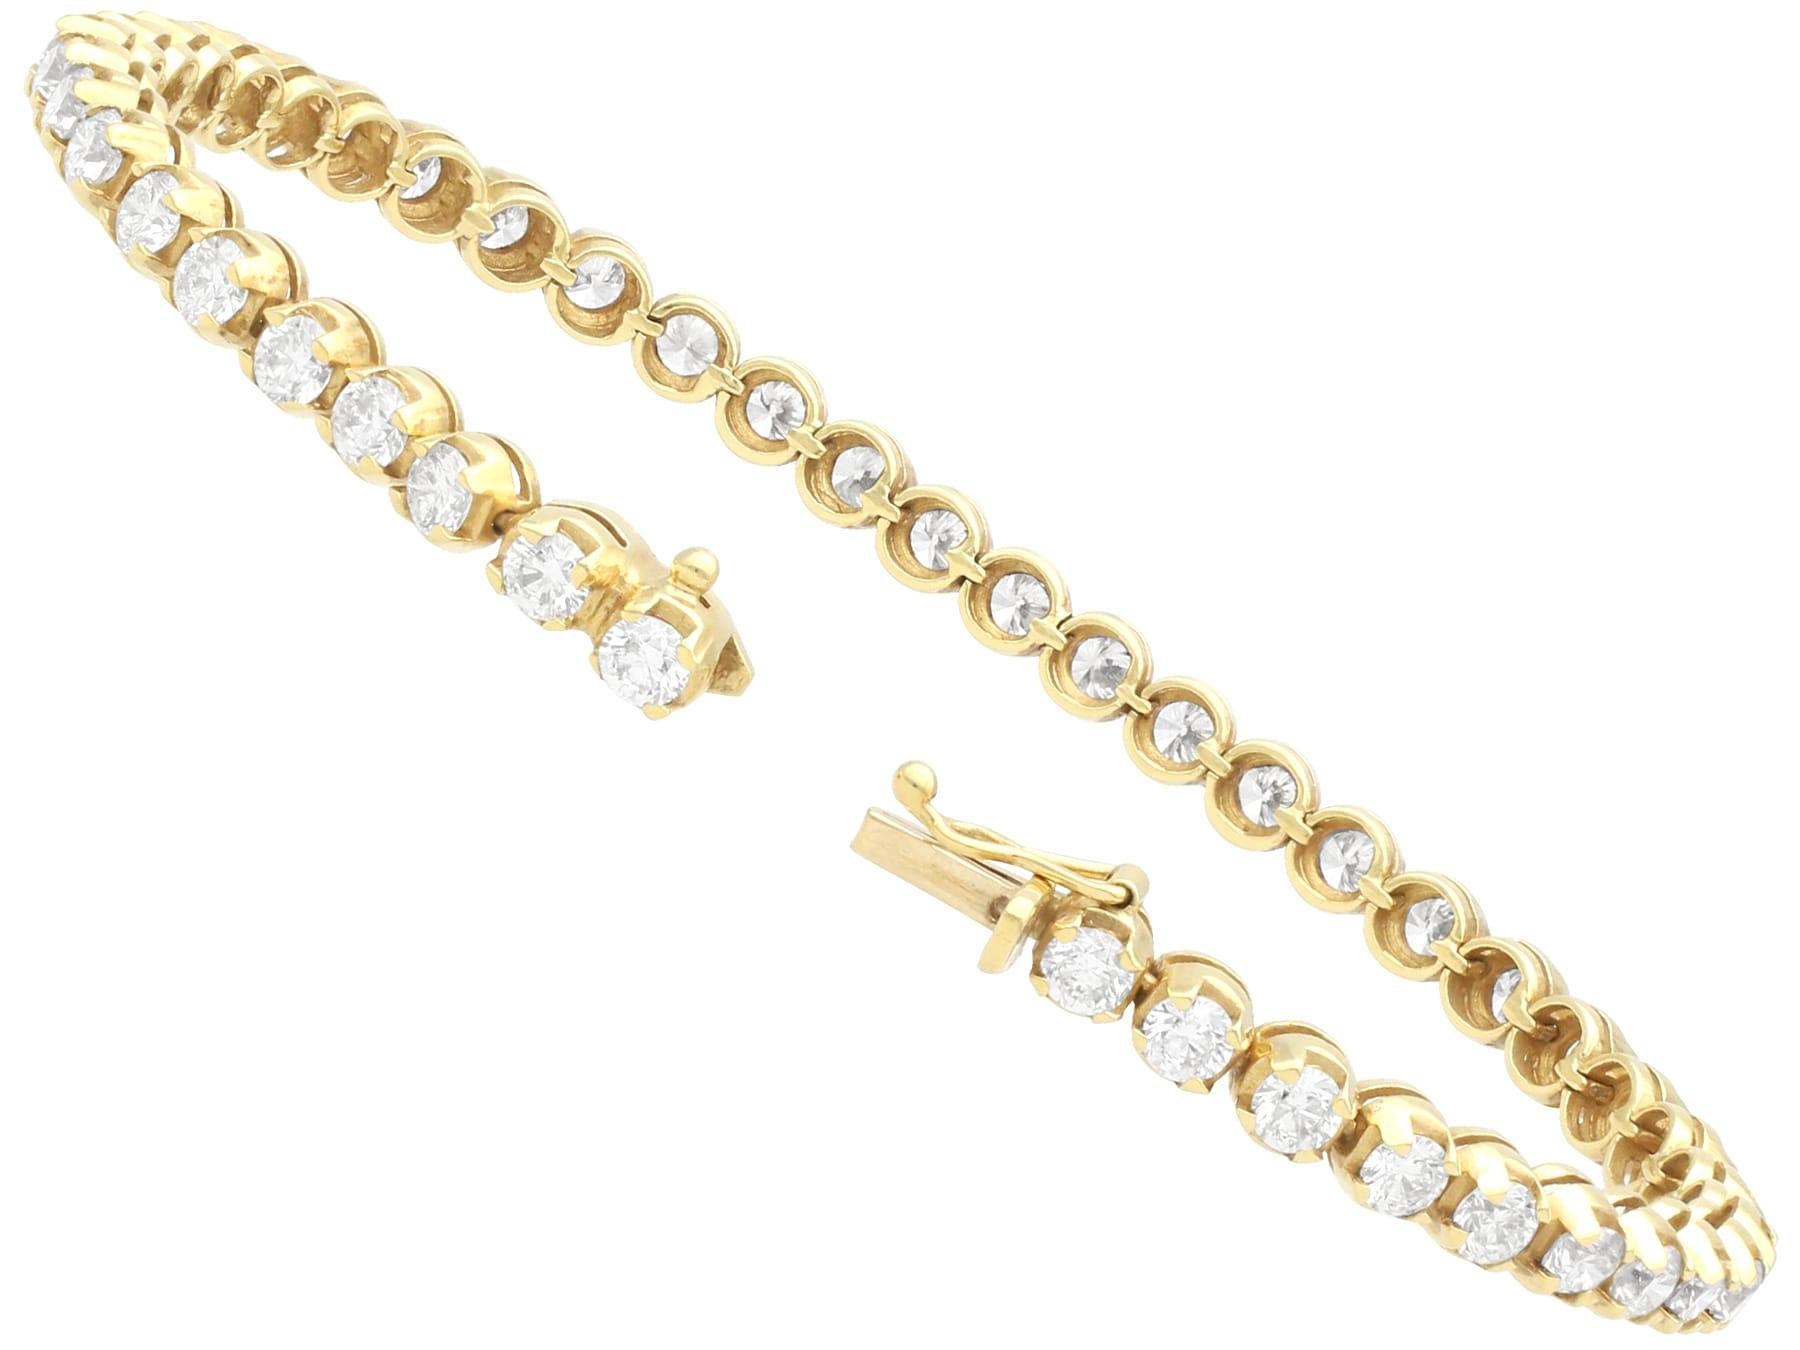 Contemporary 6.36 Carat Diamond and Yellow Gold Tennis Bracelet In Excellent Condition For Sale In Jesmond, Newcastle Upon Tyne